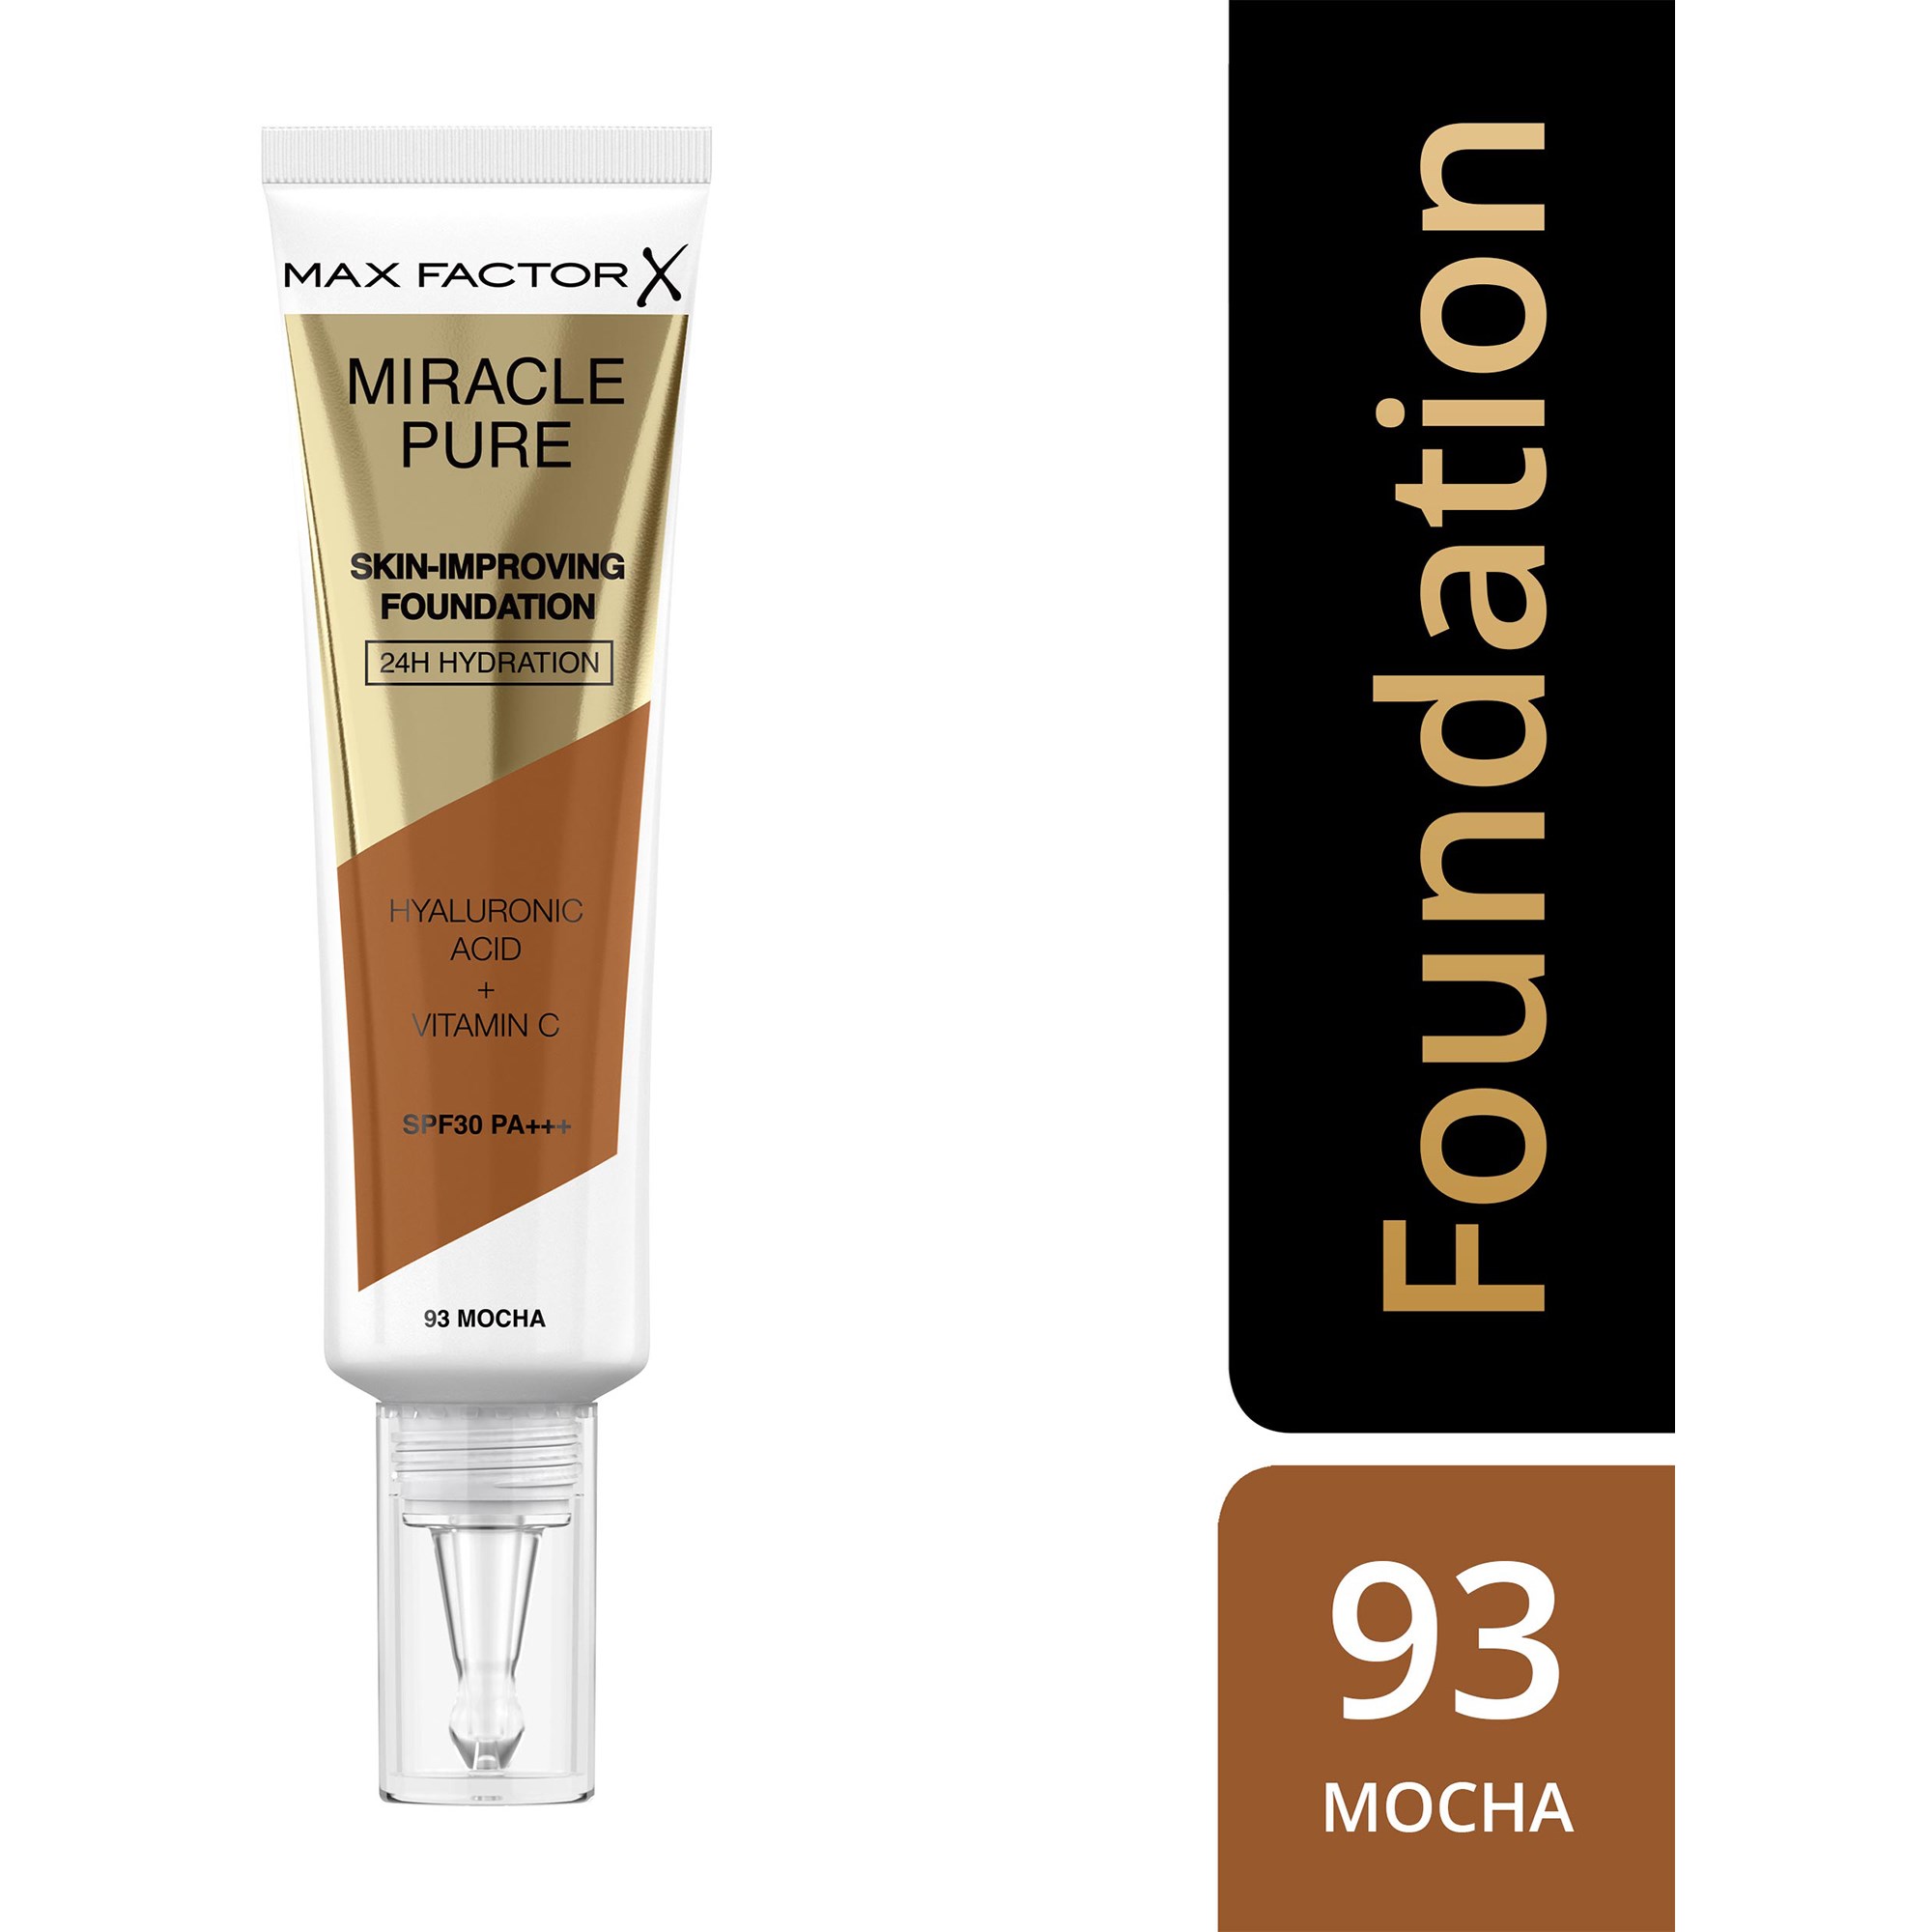 Max Factor Miracle Pure Foundation 93 Mocha